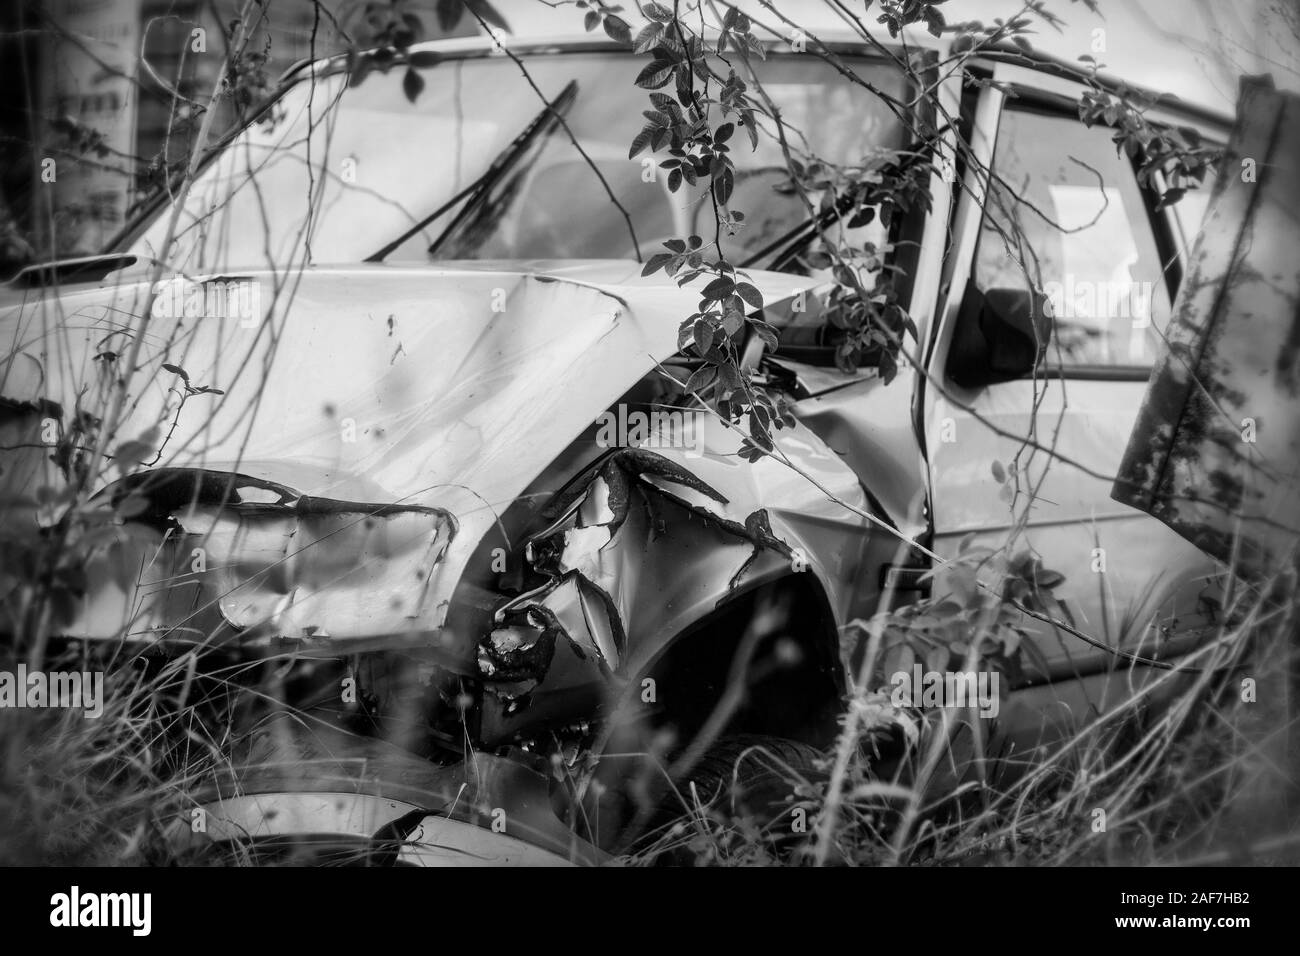 Photo of damaged and rusty car after crash, black and white. Stock Photo